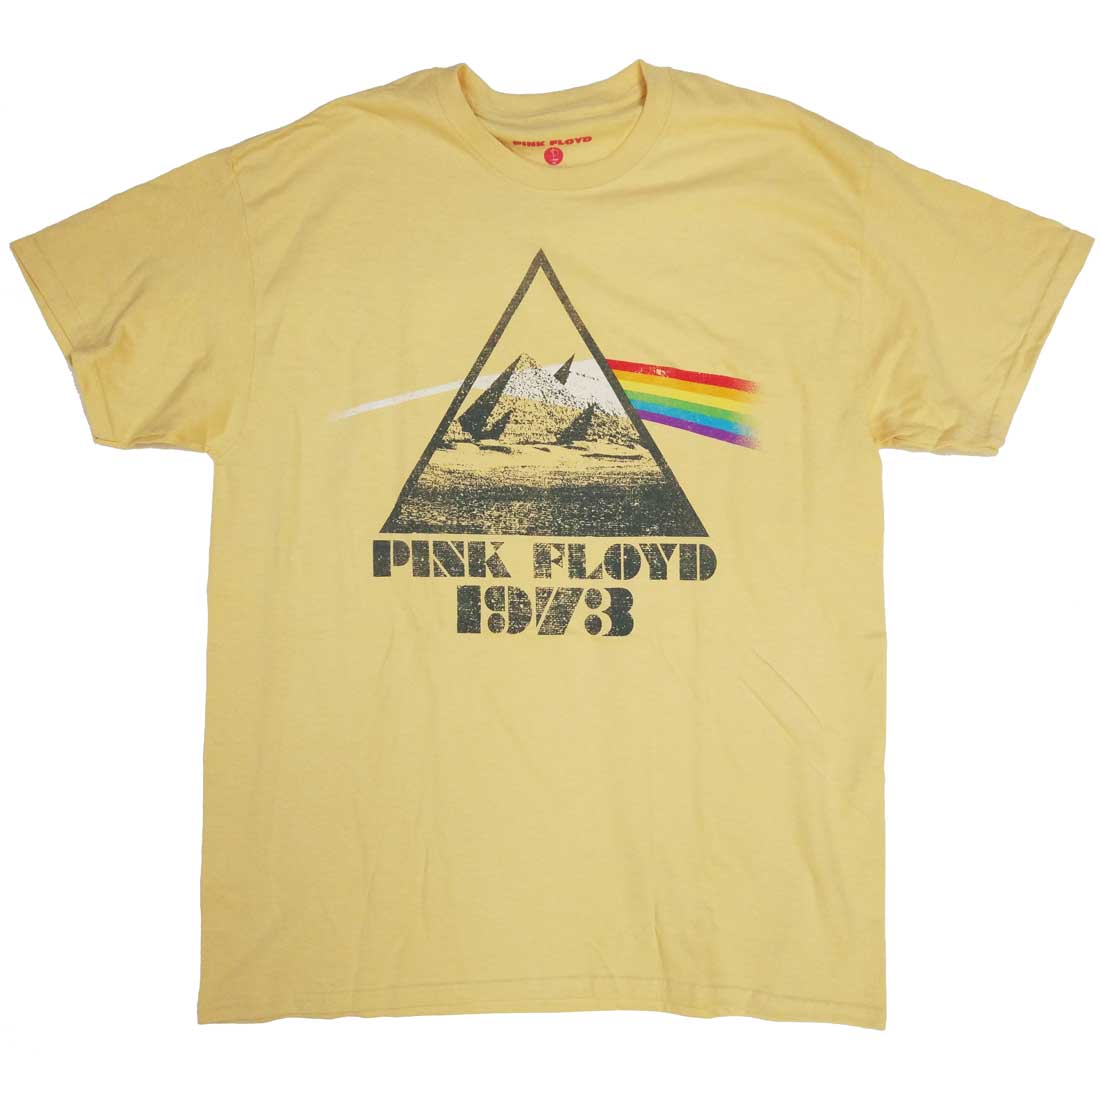 Pink Floyd T Shirt - 1973 Pyramids Tour Dark Side Of The Moon 100% Official Yellow